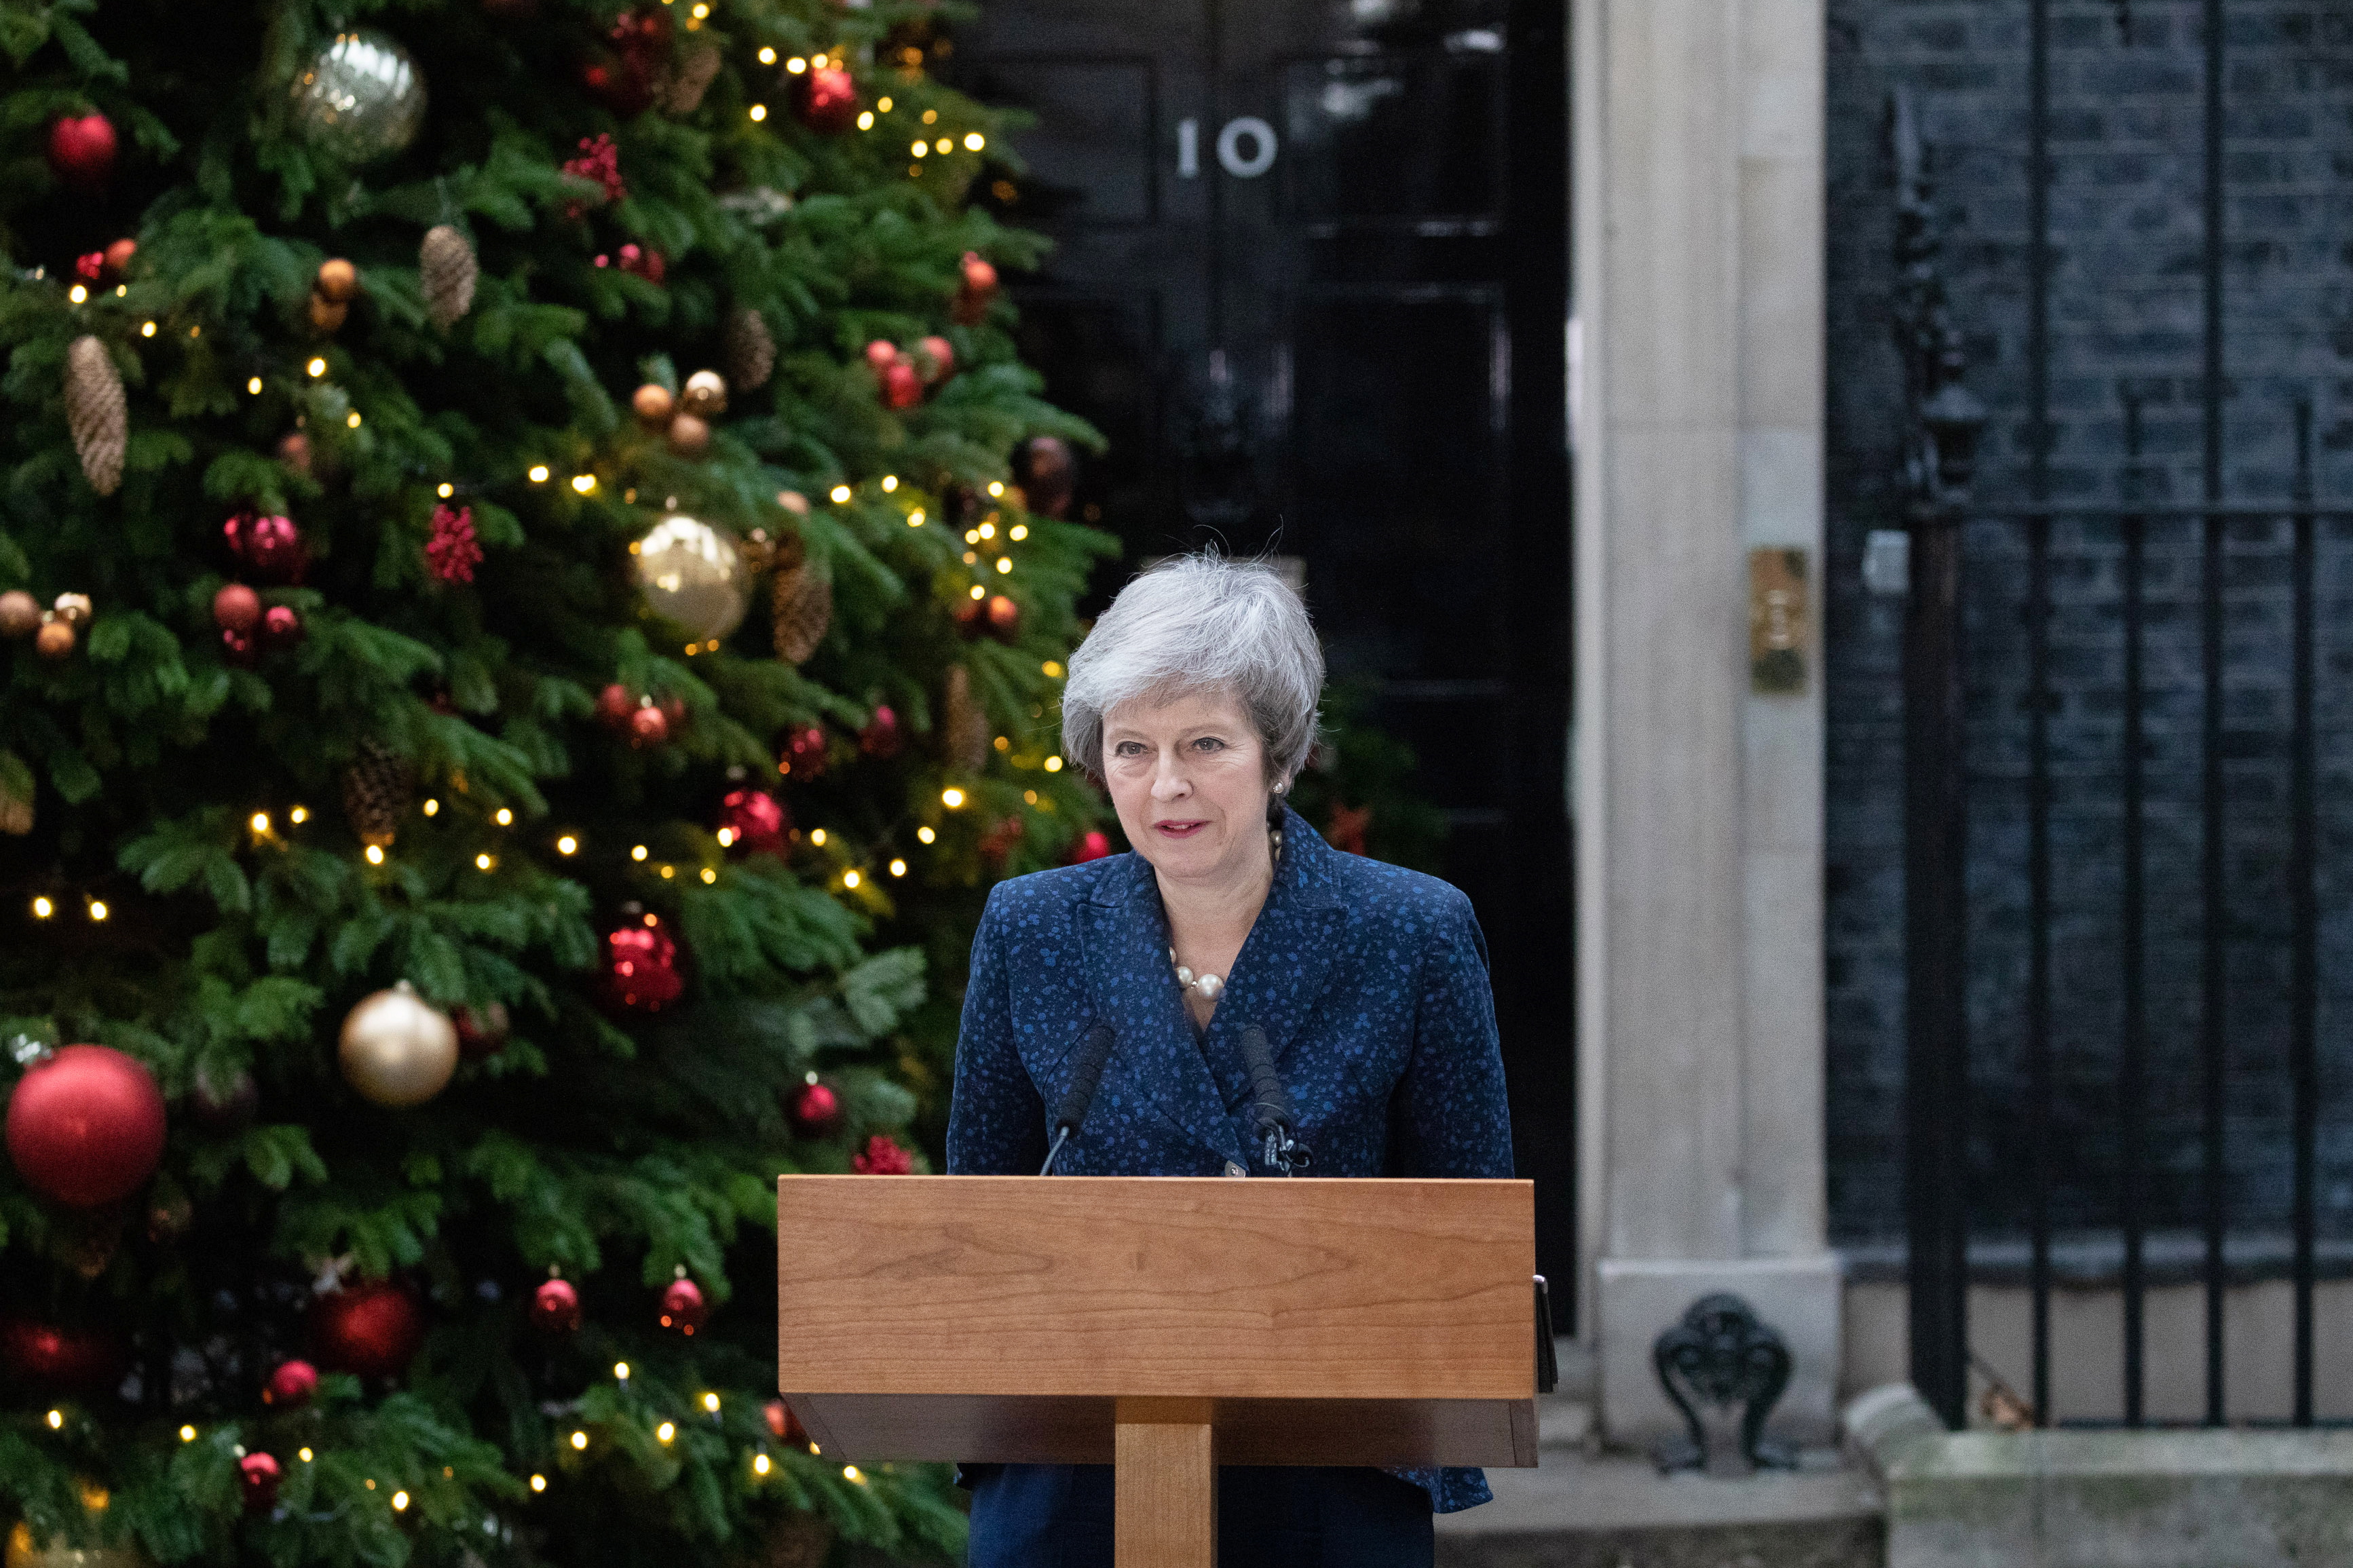 epa07225275 British Prime Minister Theresa May gives a statement outside 10 Downing Street, central London, Britain, 12 December 2018. Theresa May will face a challenge to her leadership on 12 December 2018 after 48 letters calling for a contest were delivered to the Chariman of the 1922 Committee. May will find out her future after Conservative Members of Parliament vote between 18:00 GMT and 20:00 GMT later in the evening.  EPA/STR